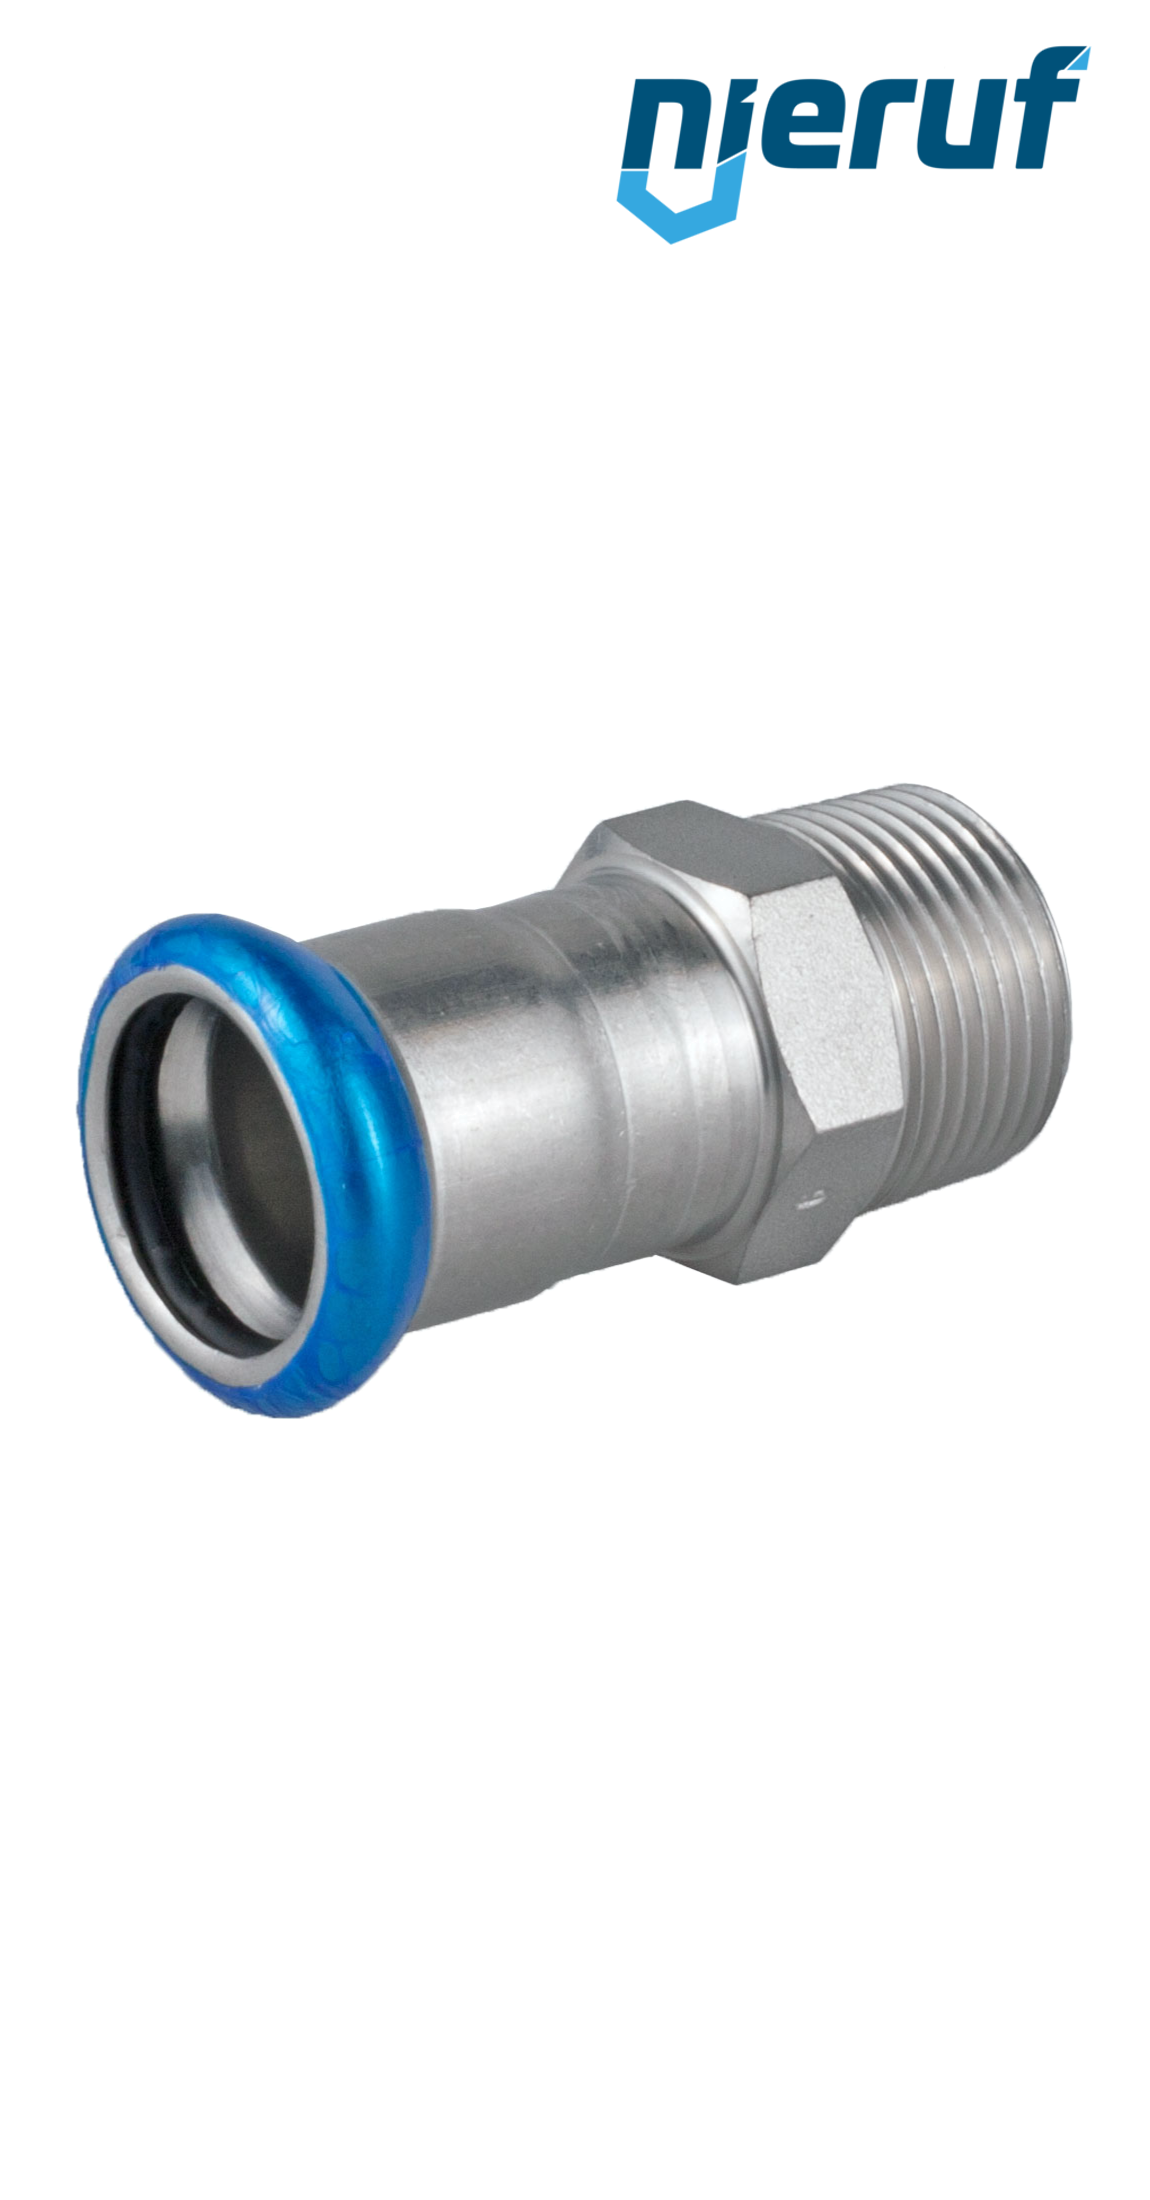 Press Fitting Male Coupling F Pressfitting DN50 - 54,0 mm male thread 1 1/2" inch stainless steel